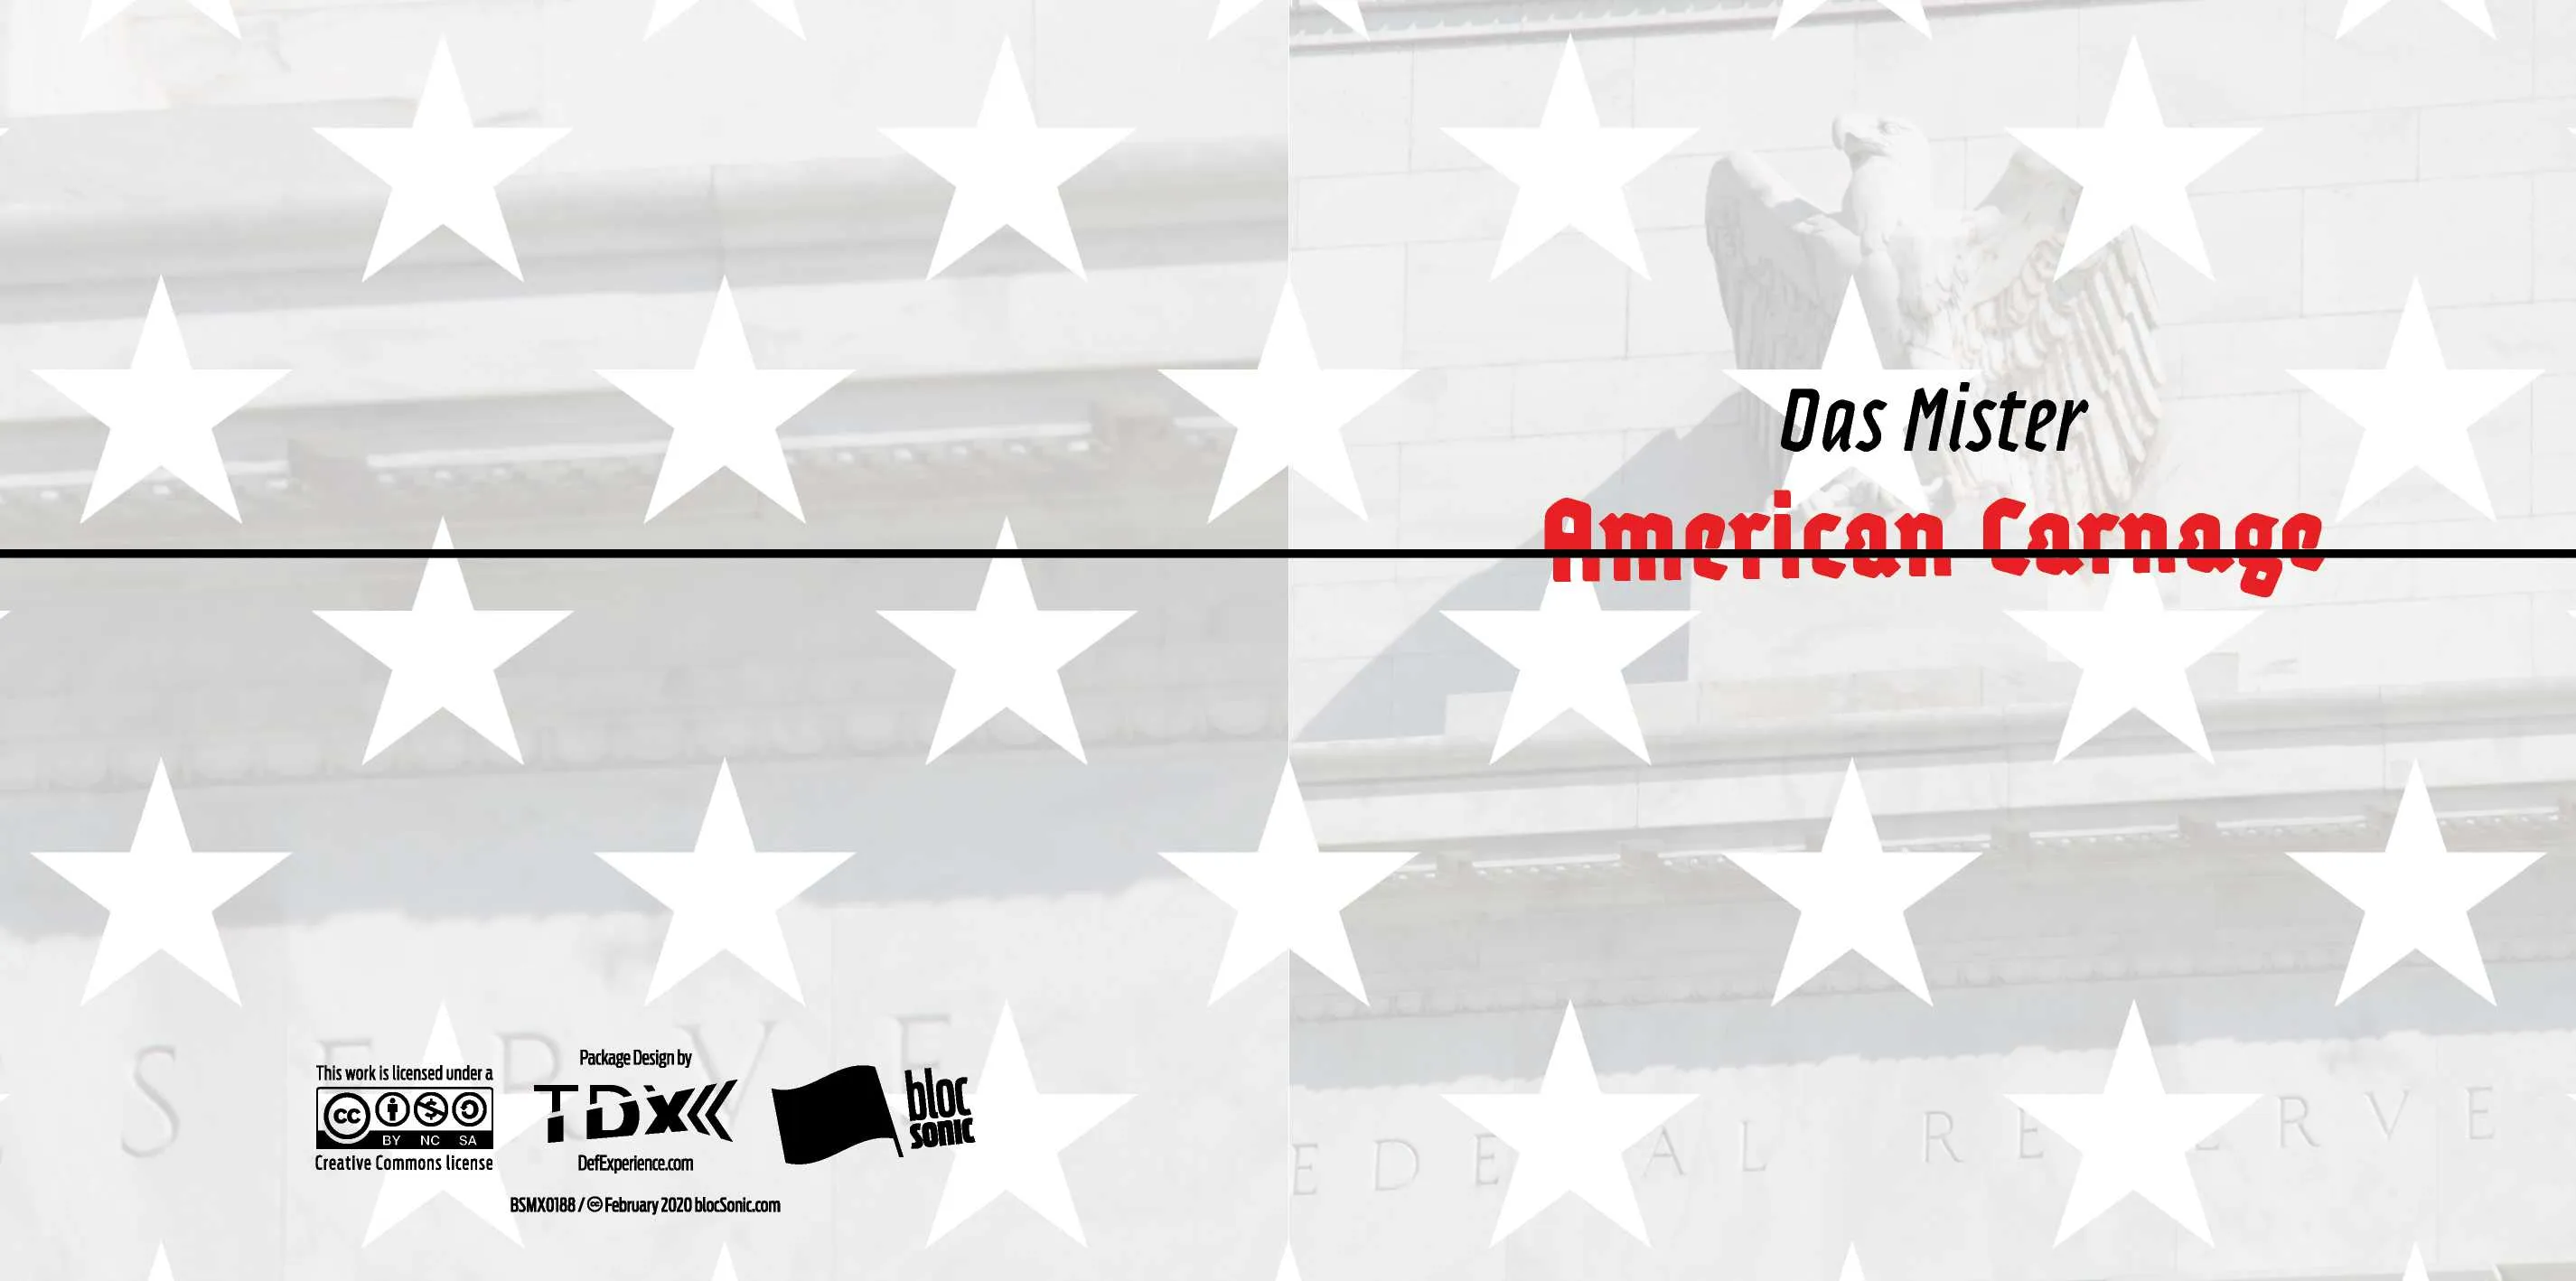 Album insert for “American Carnage” by Das Mister